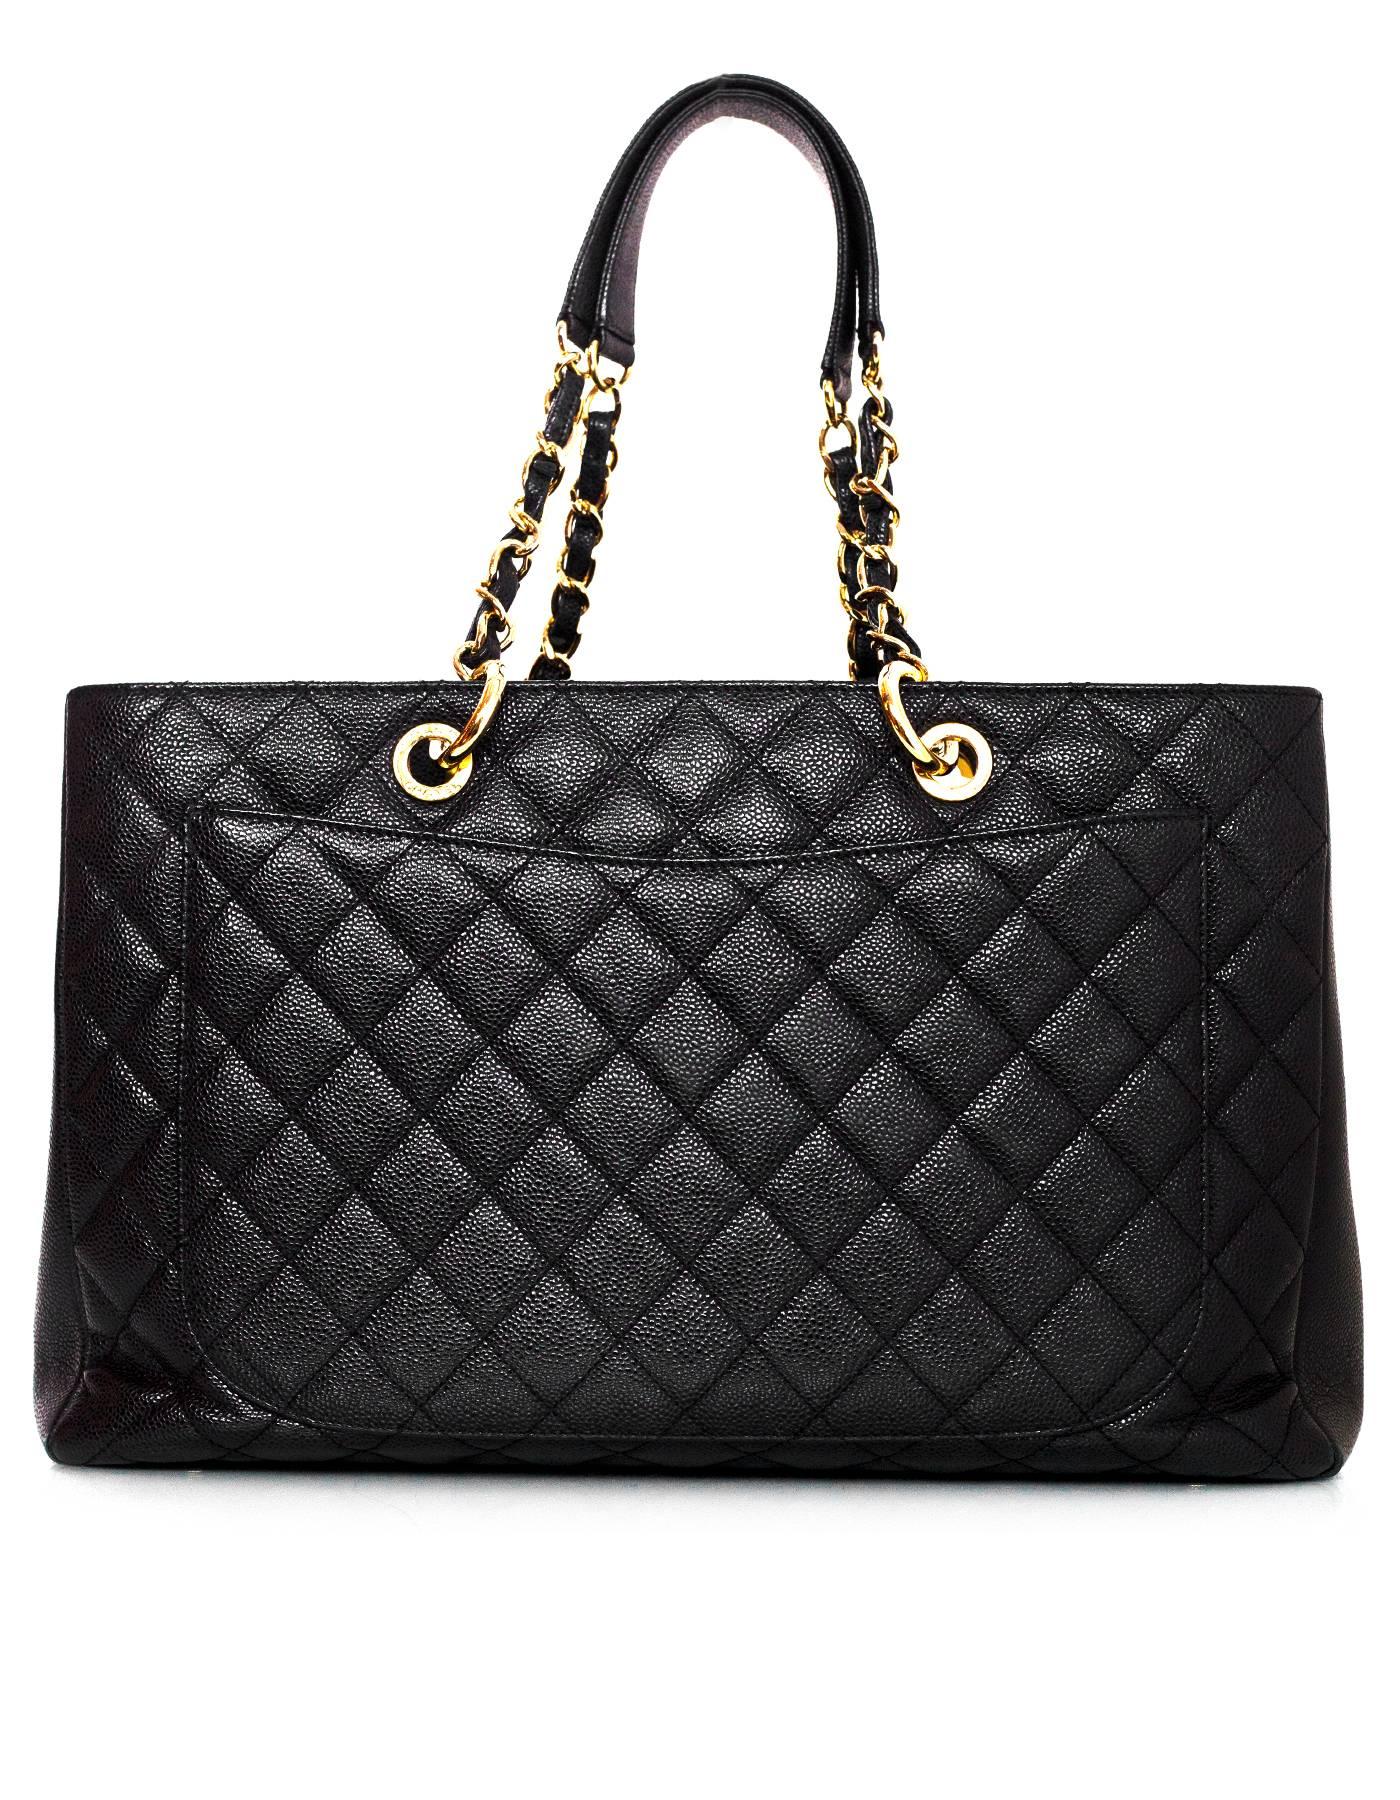 Chanel Black Caviar XL GST Grand Shopper Tote
Features timeless CC stitched on front of bag

Made In: Italy
Year of Production: 2012
Color: Black
Hardware: Goldtone
Materials: Caviar leather
Lining: Black satin
Closure/Opening: Open top
Exterior